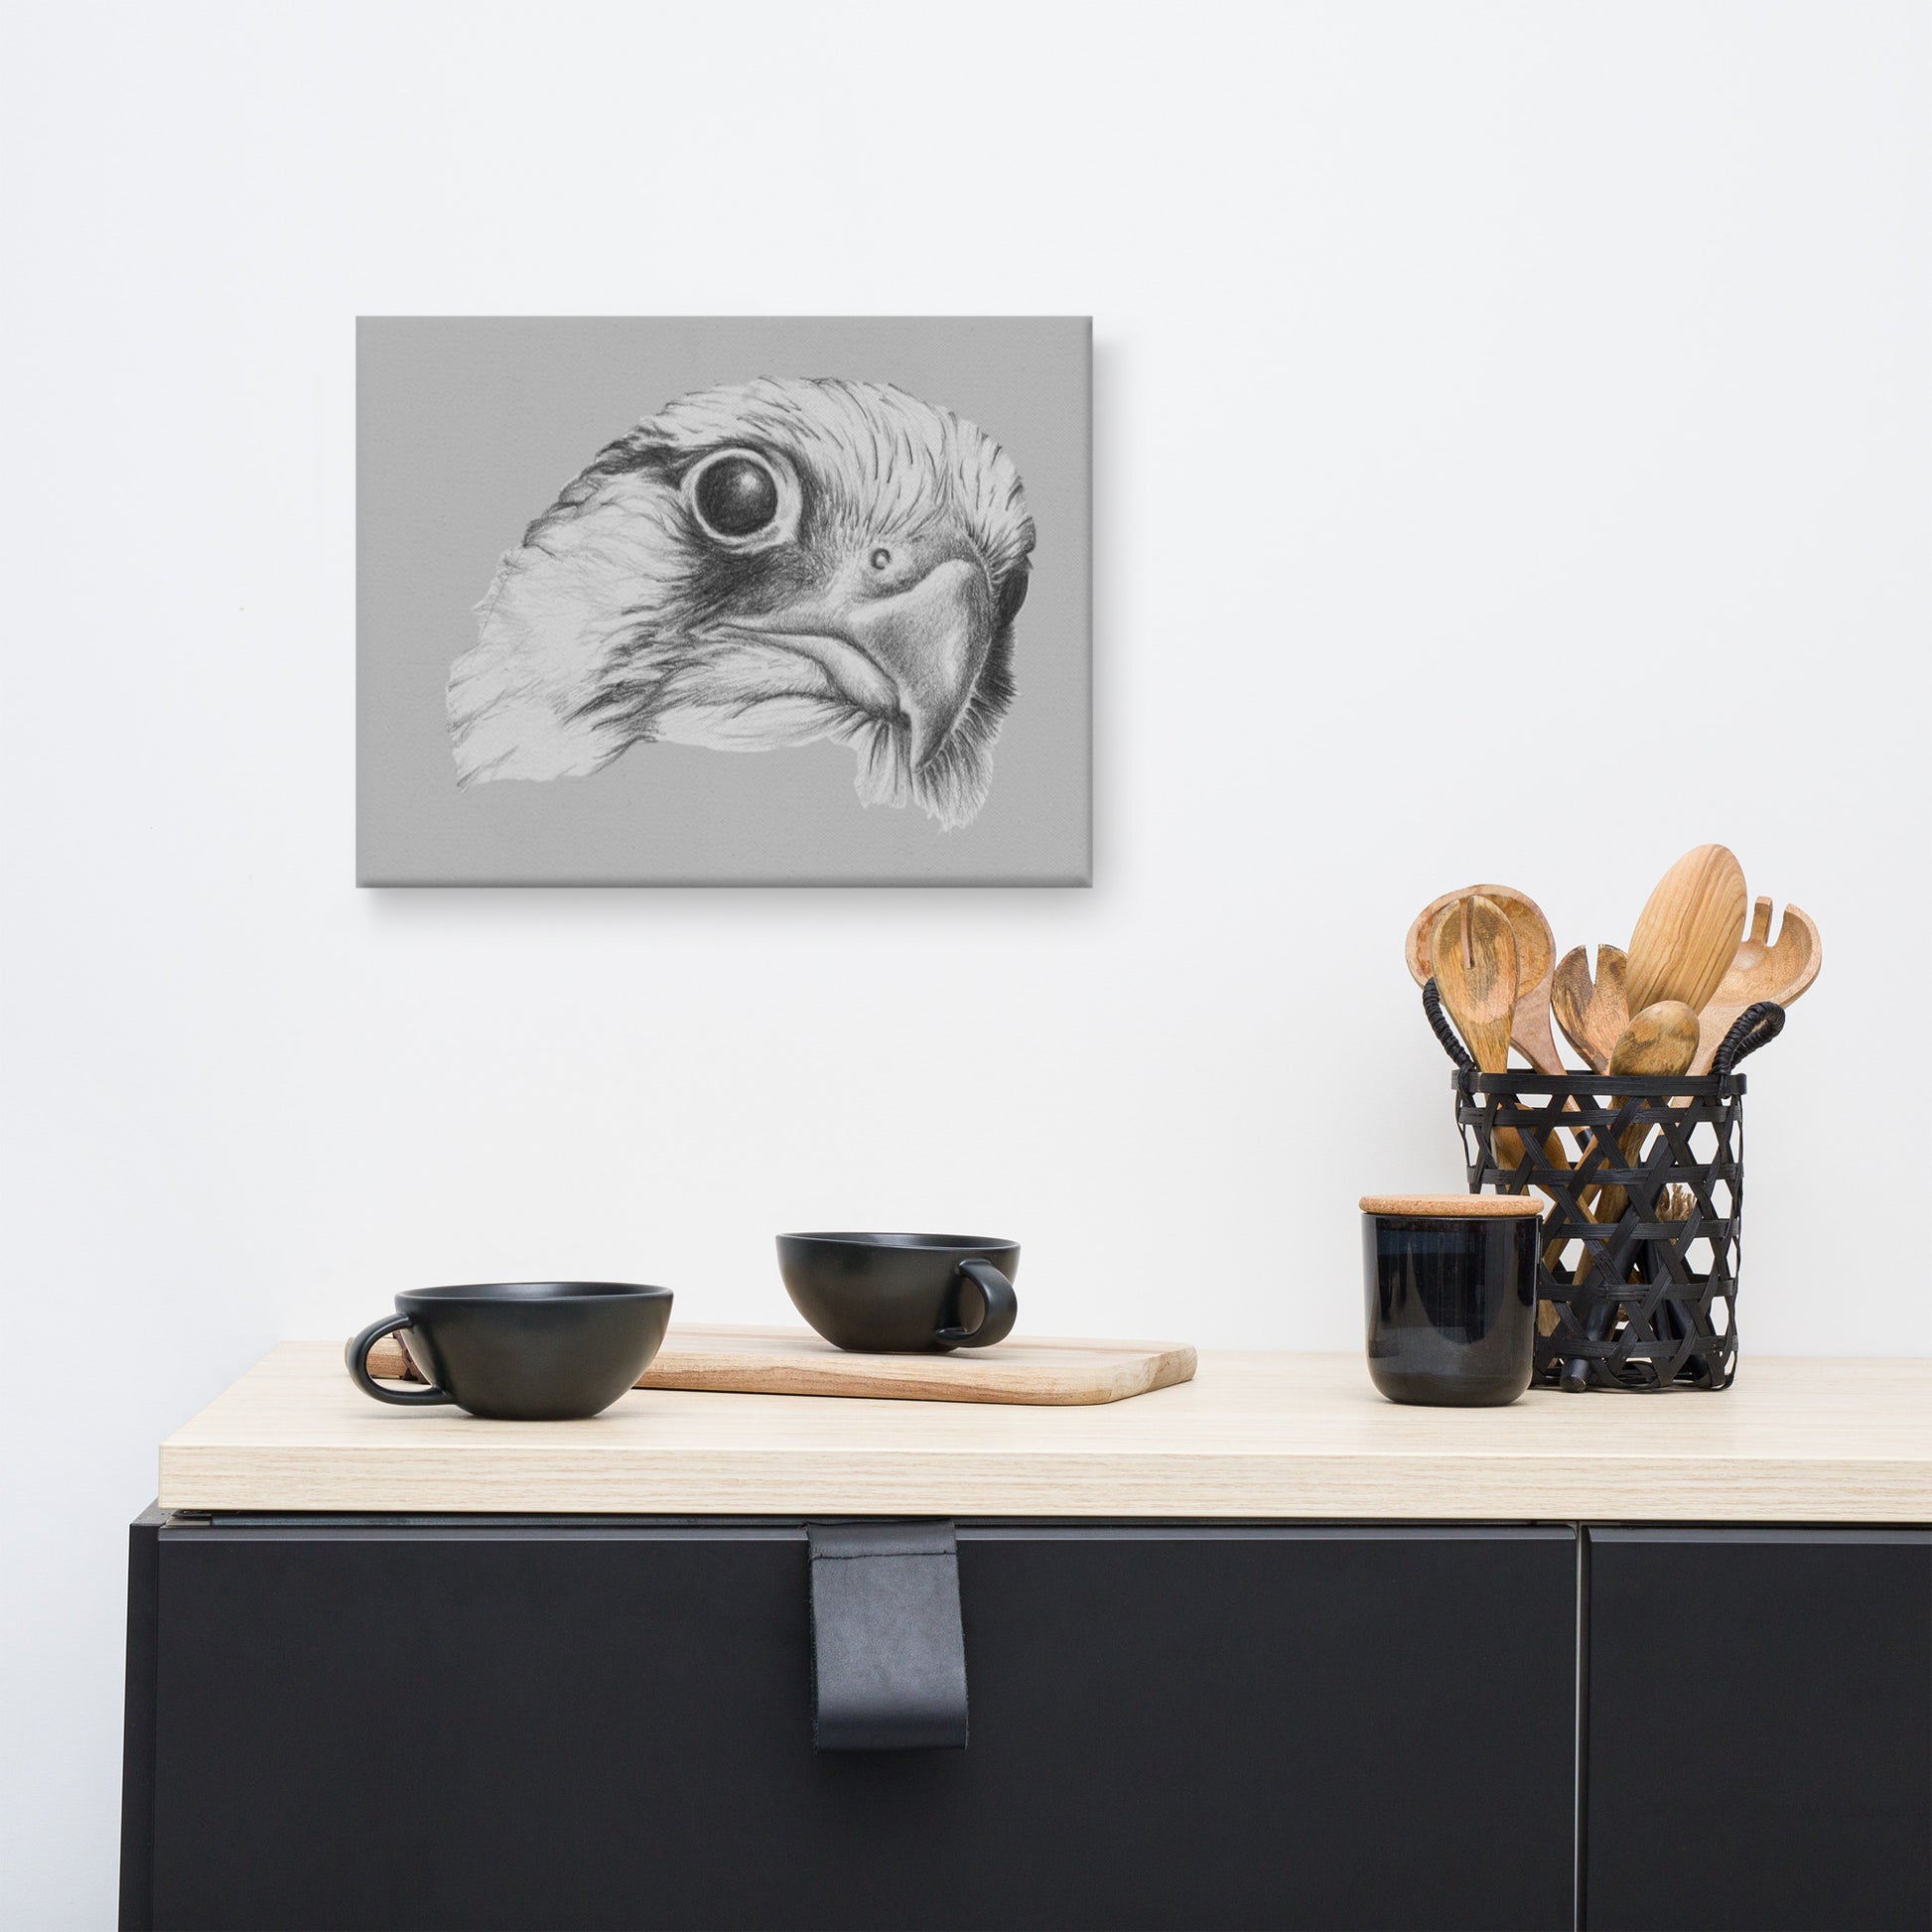 These "Hawk Canvas Wall Hangings" are from a drawing of mine created with a graphite pencil. It has been digitally optimized and transferred to a poly-cotton blend canvas.